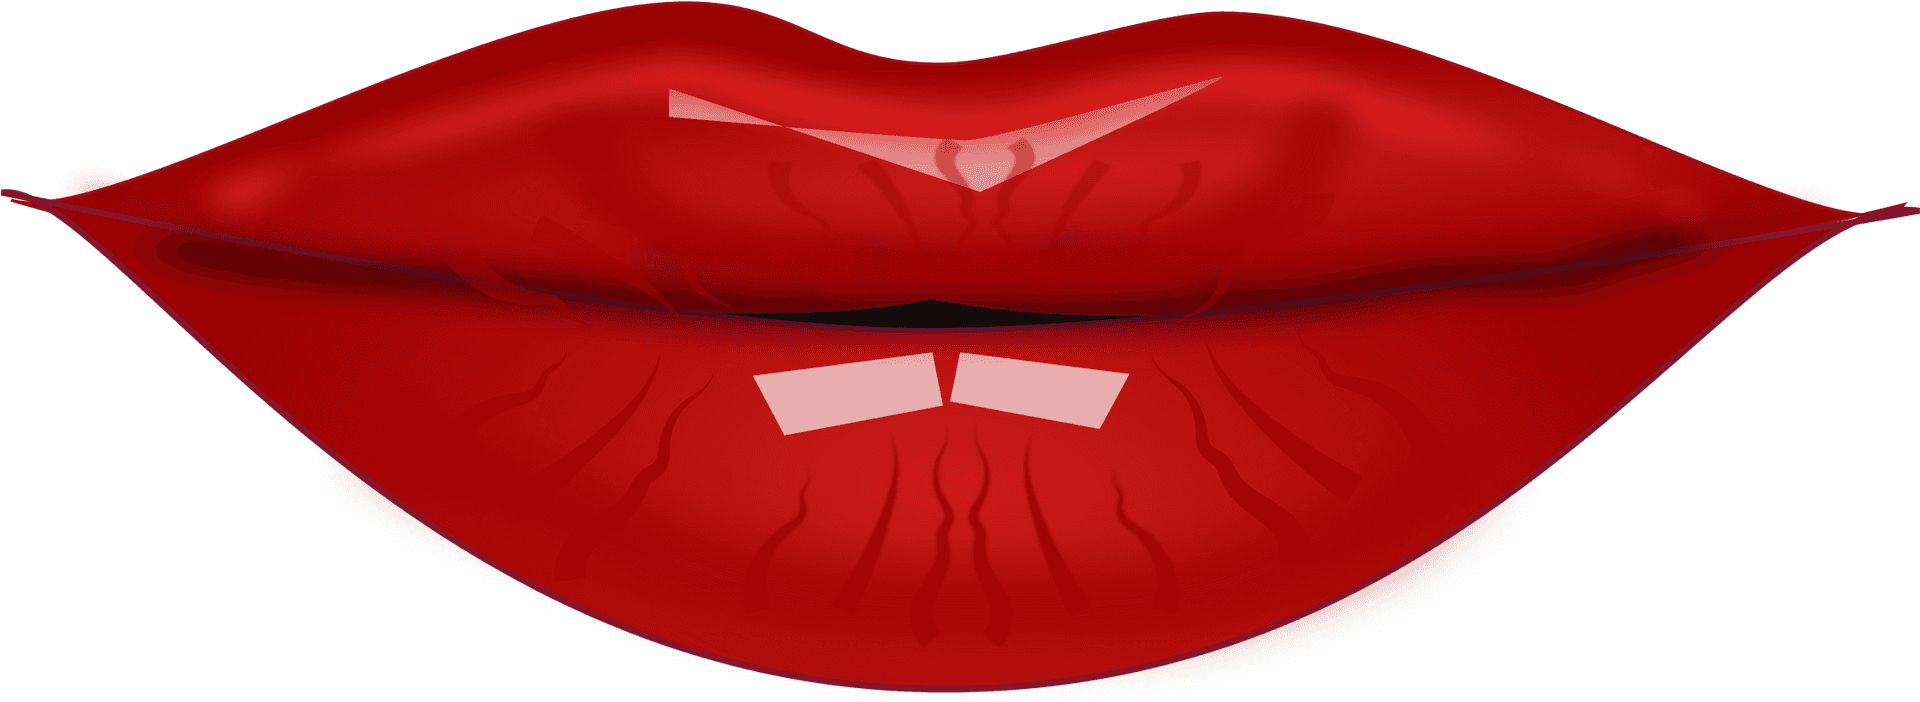 Red Lips Illustration PNG